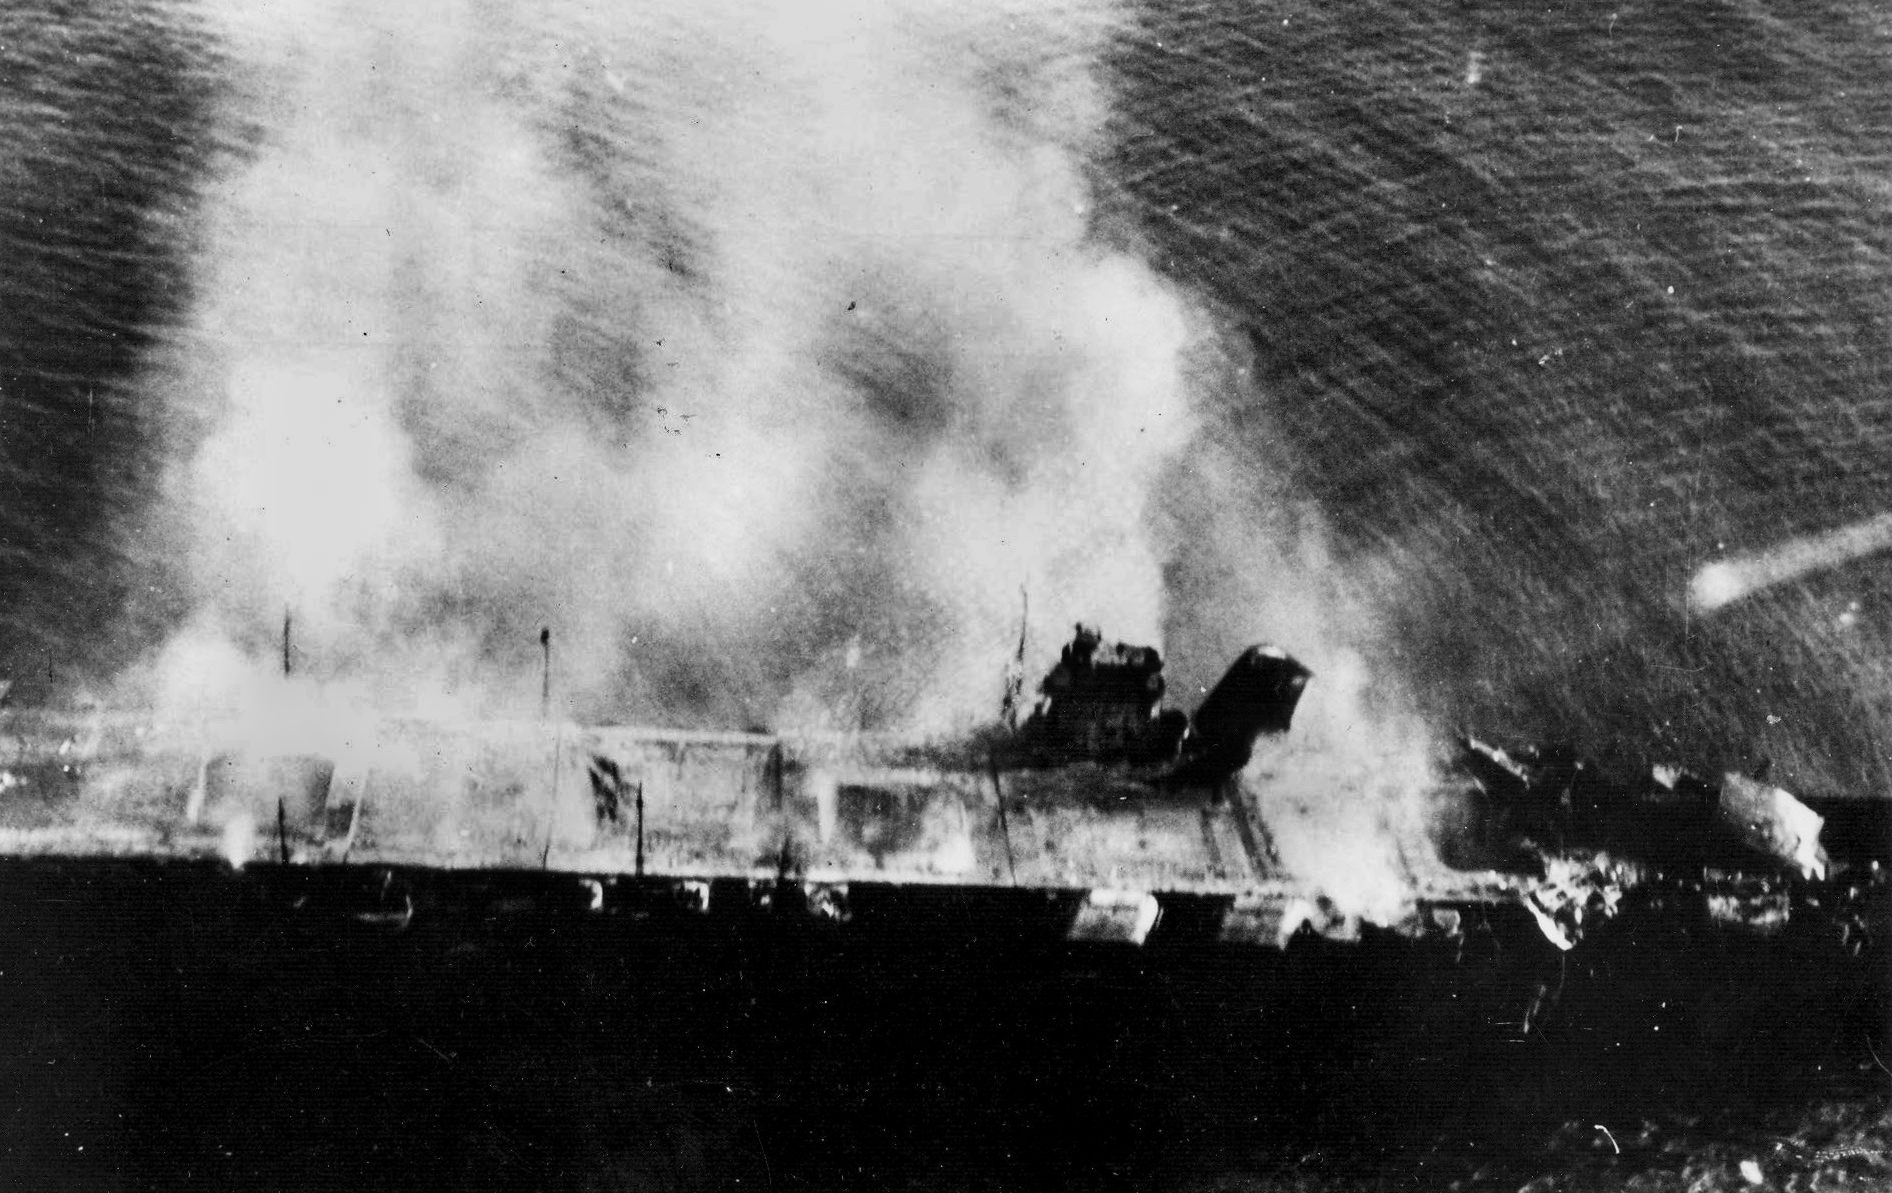 Stricken Japanese carrier Hiryu is photographed from a friendly plane as it burns and sinks. Admiral Tamon Yamaguchi chose to go down with his ship.